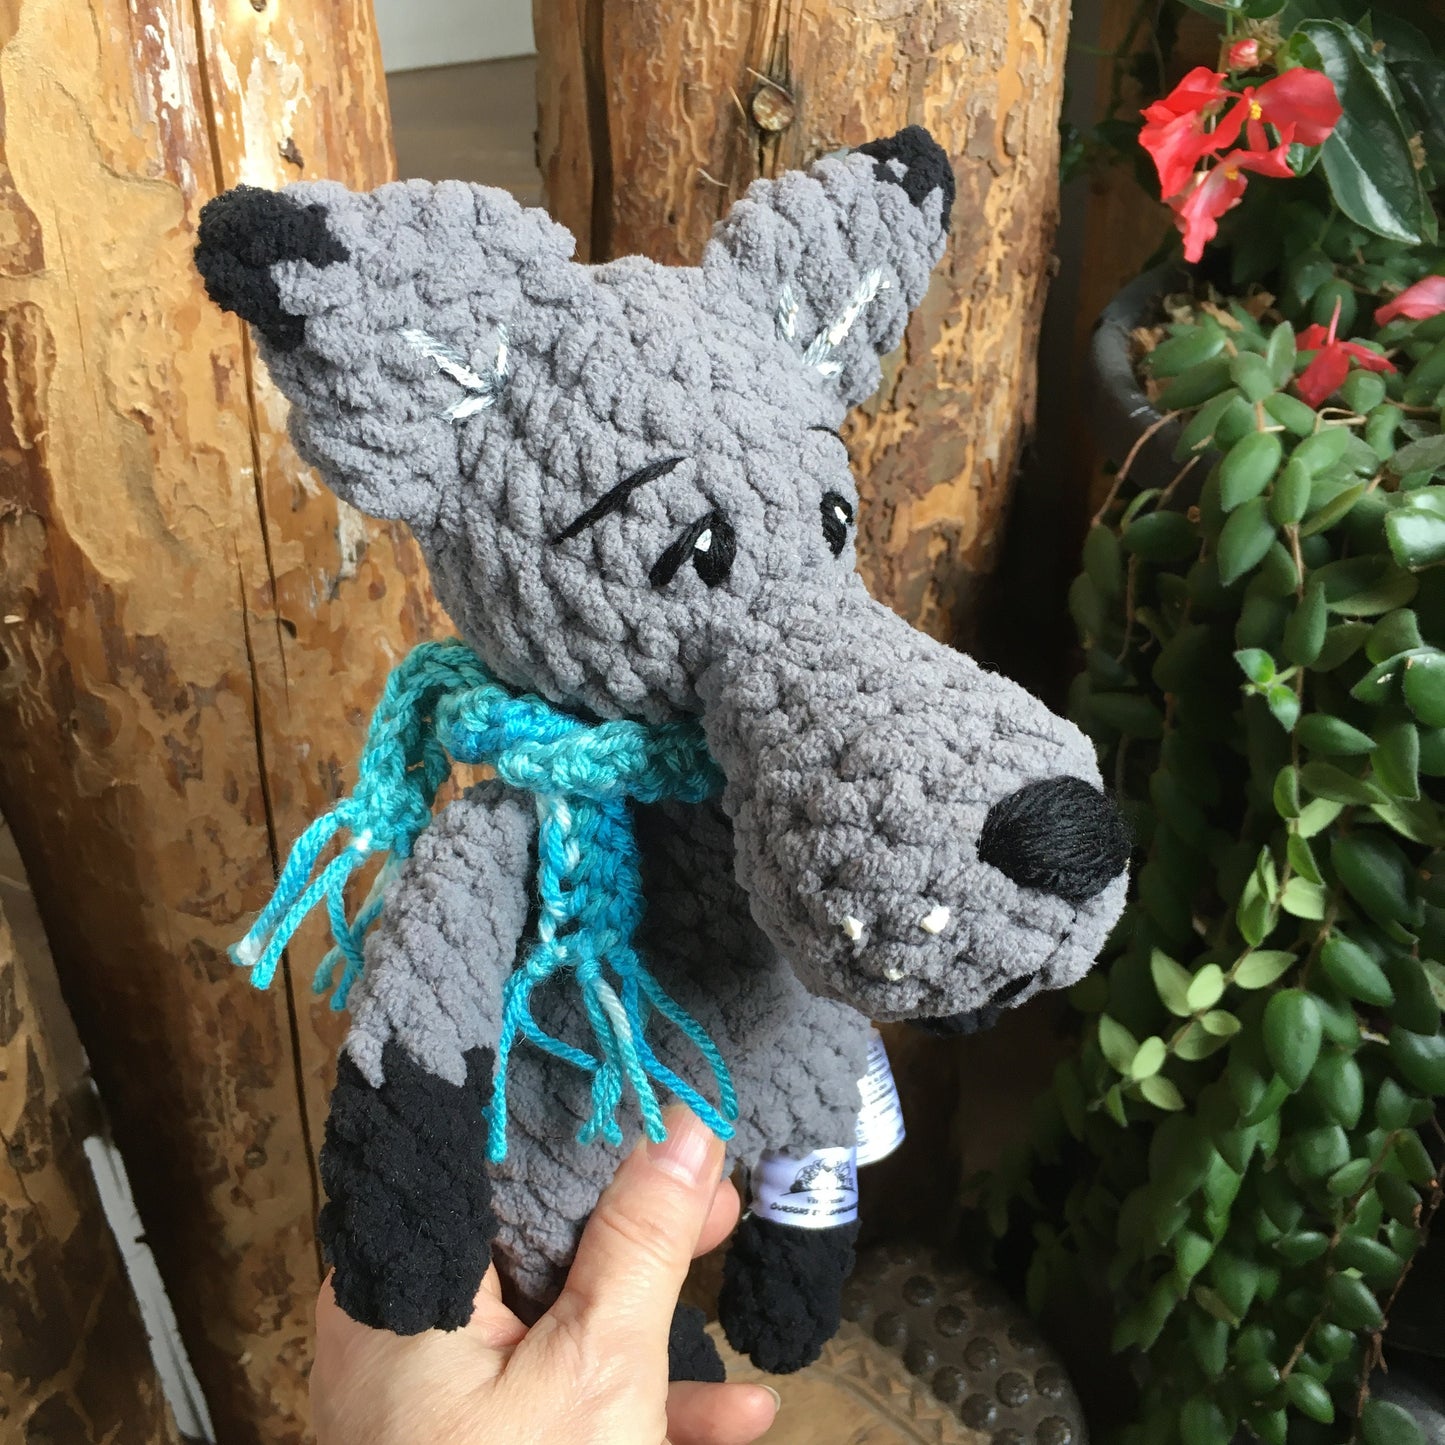 MIKAWOLF the little gray wolf